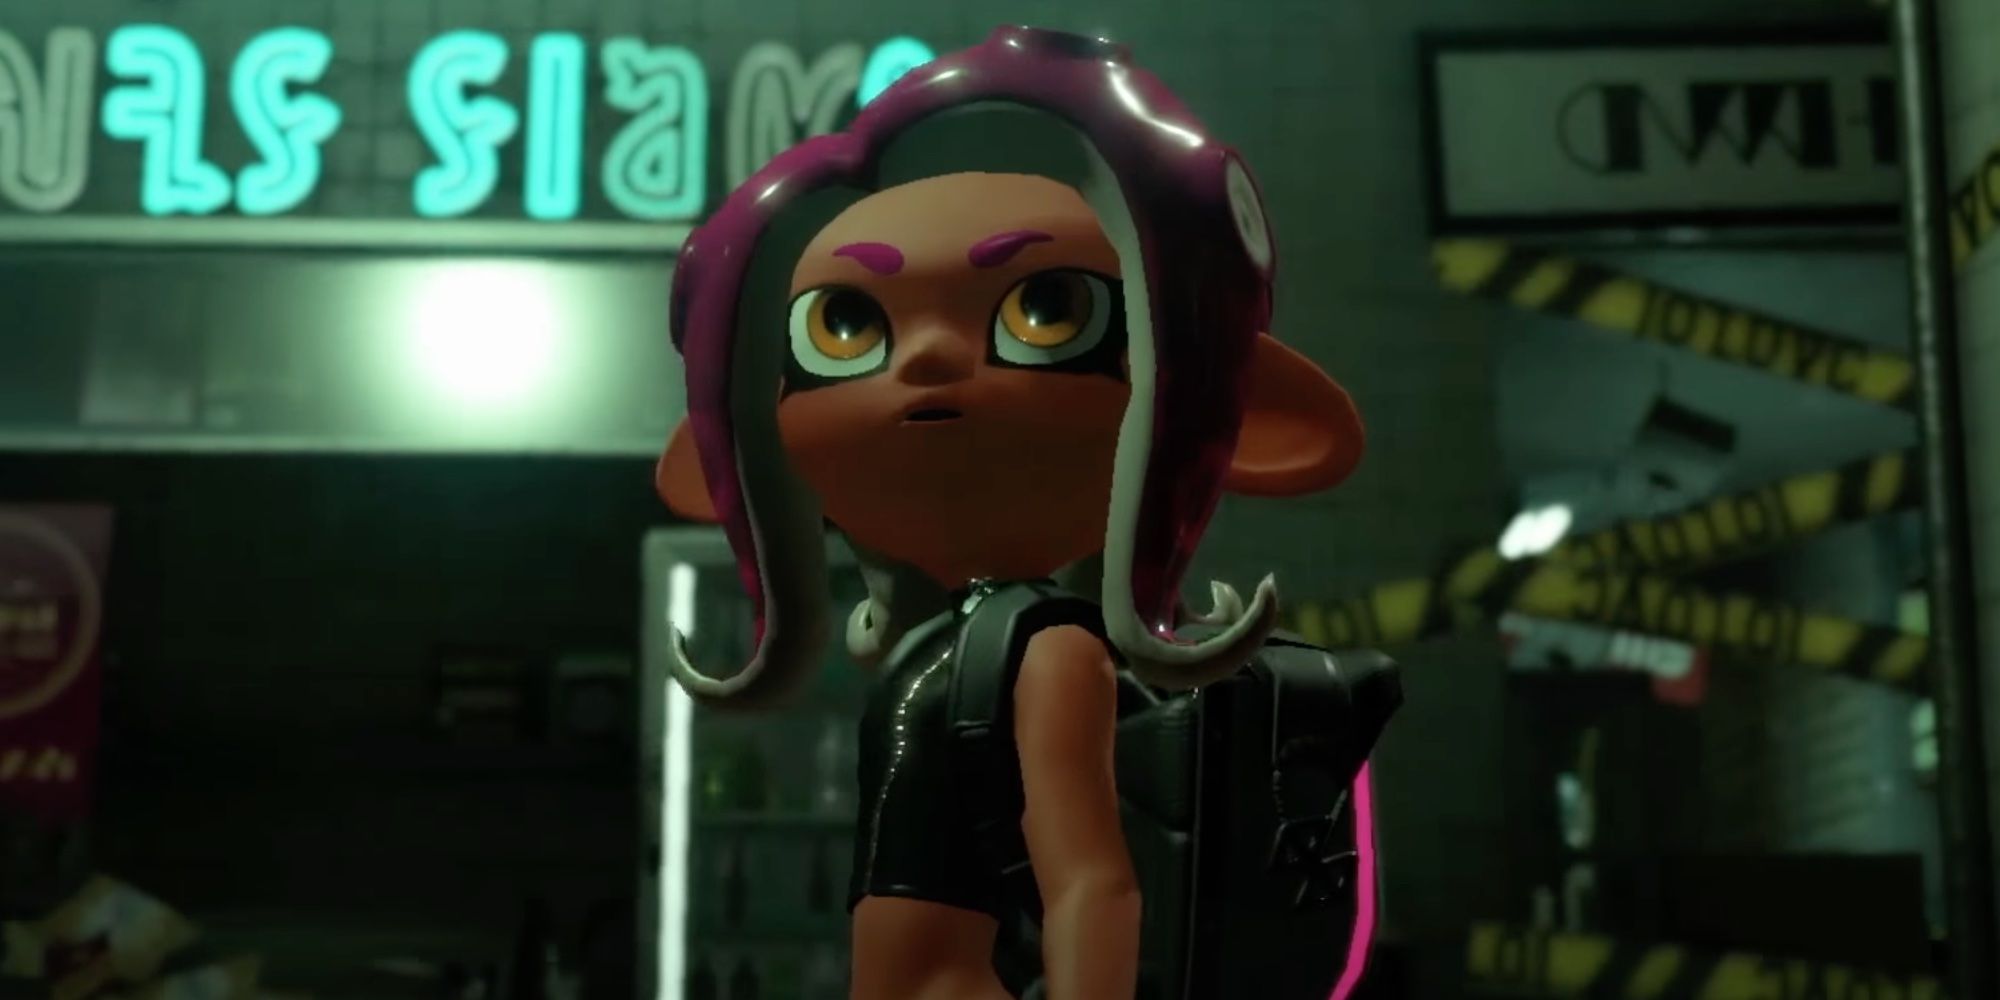 Agent 8 from Splatoon 2 Octo Expansion